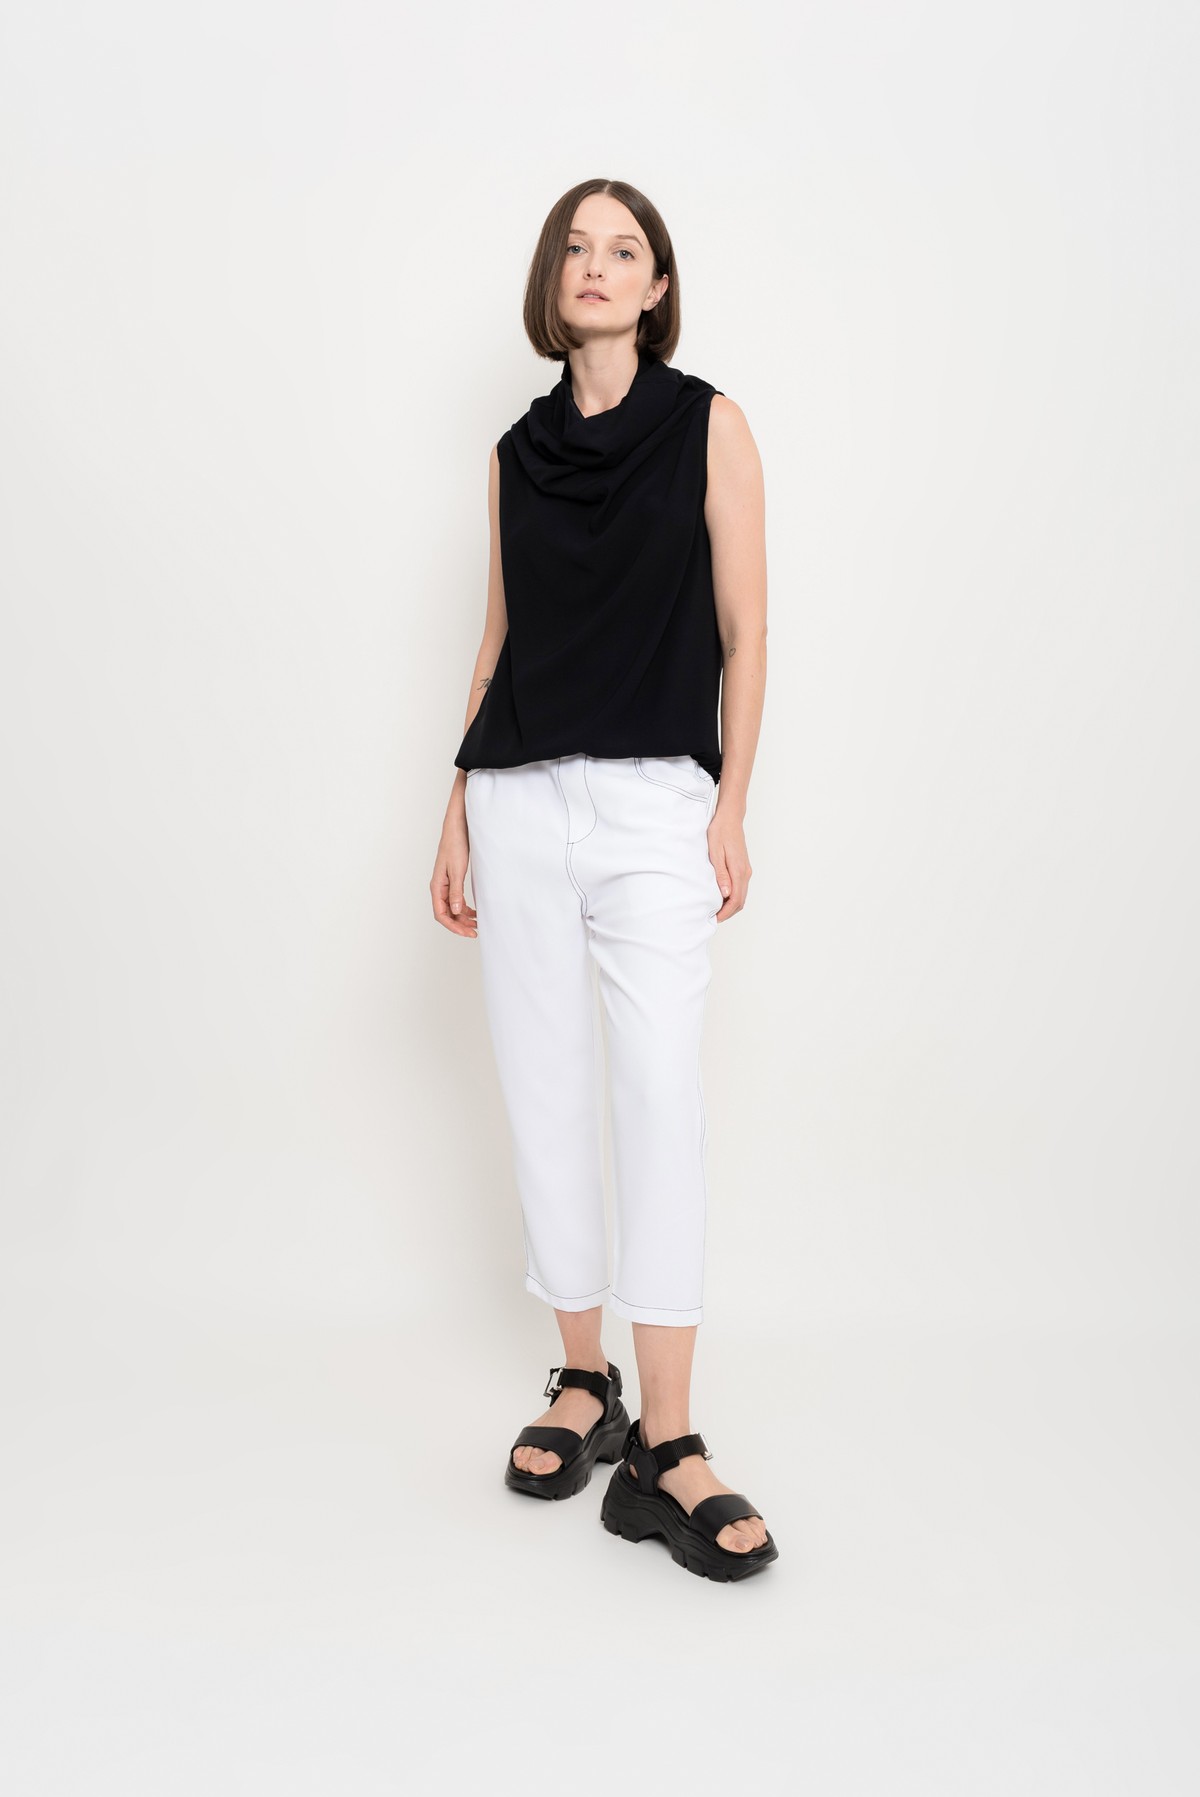 top gola ampla em crepe | crepe top with wide collar